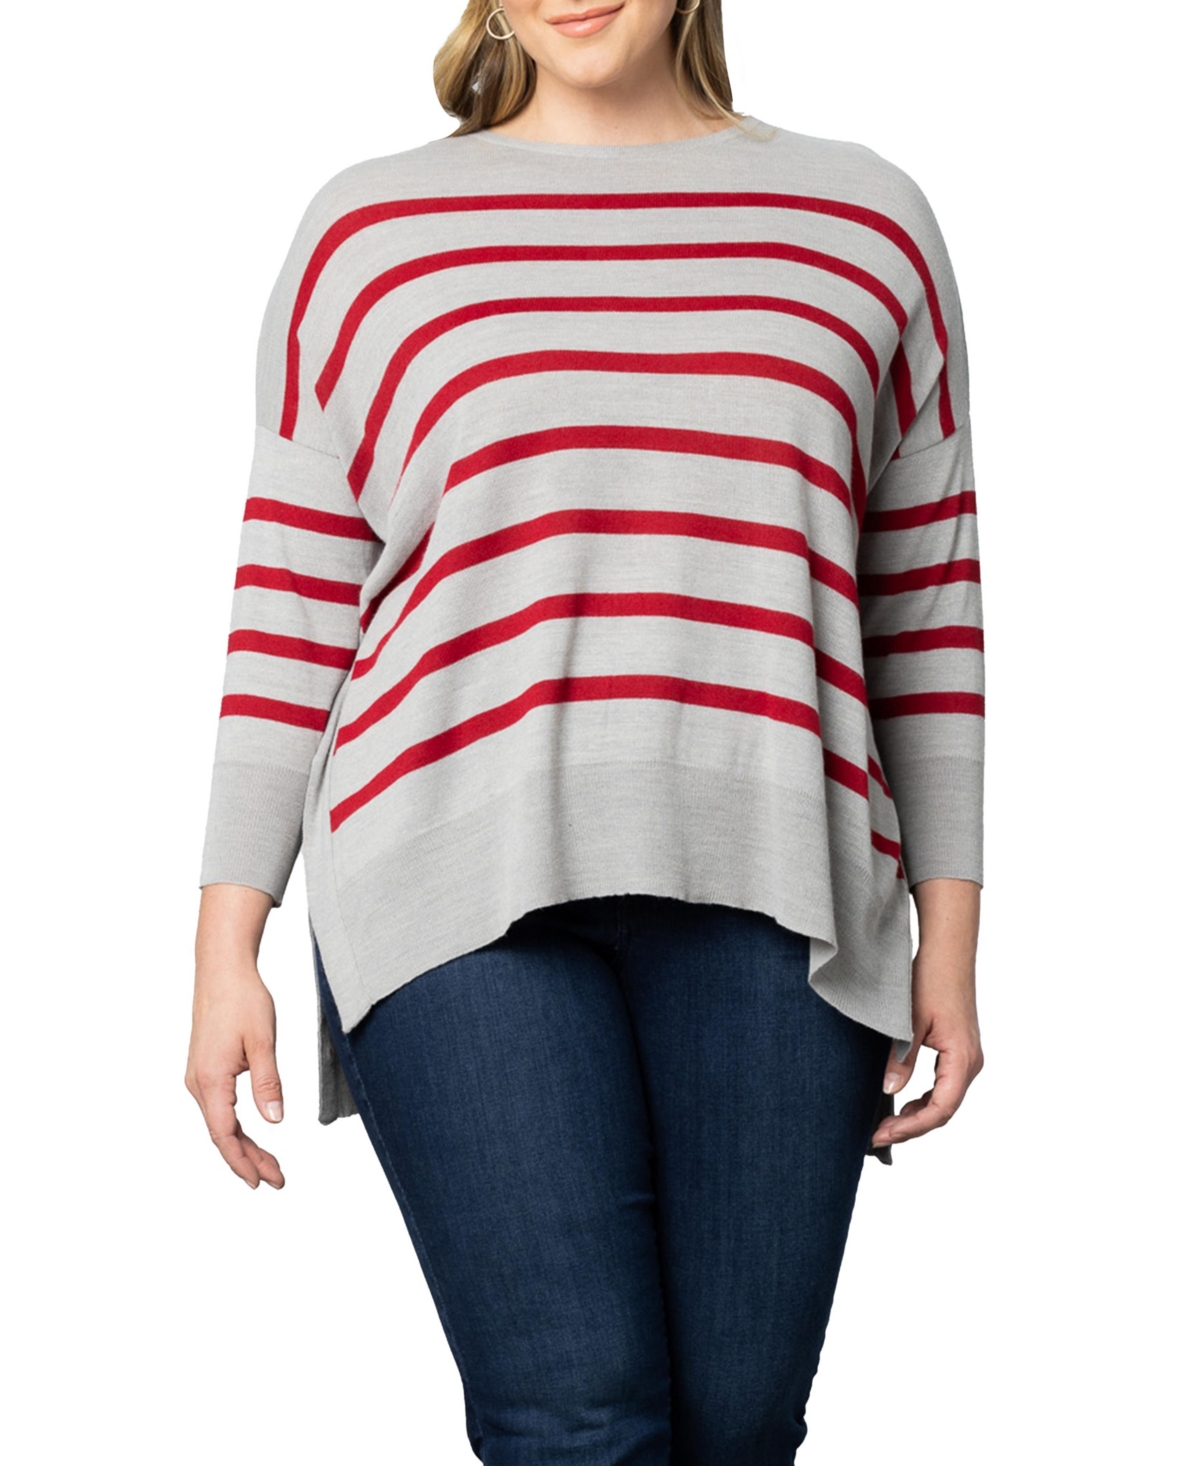 Women's Plus Size Heart on Your Sleeve Crew Neck Sweater - Red hot stripes